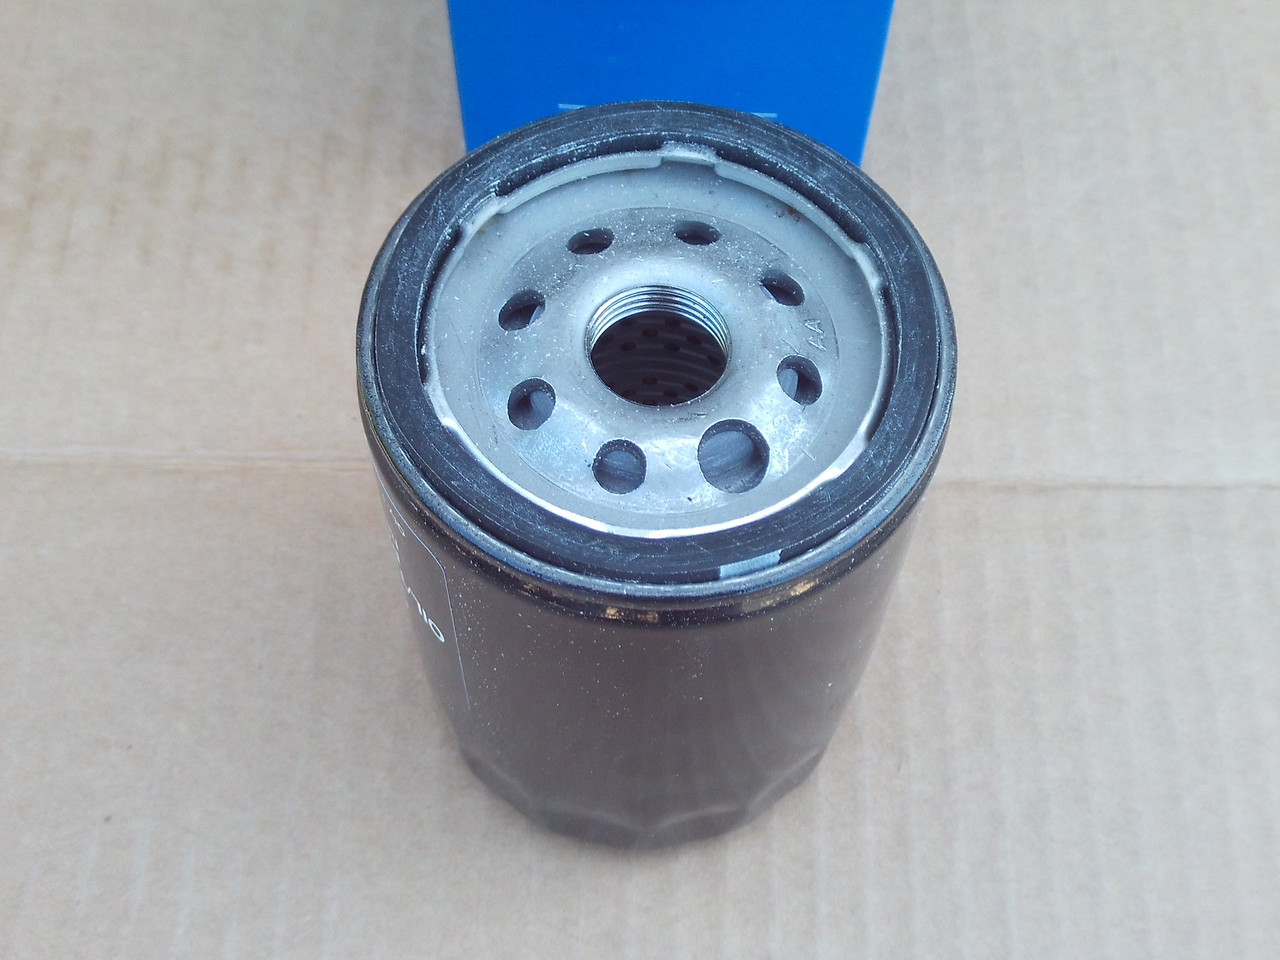 Oil Filter for Vermeer VR465D, Made In USA